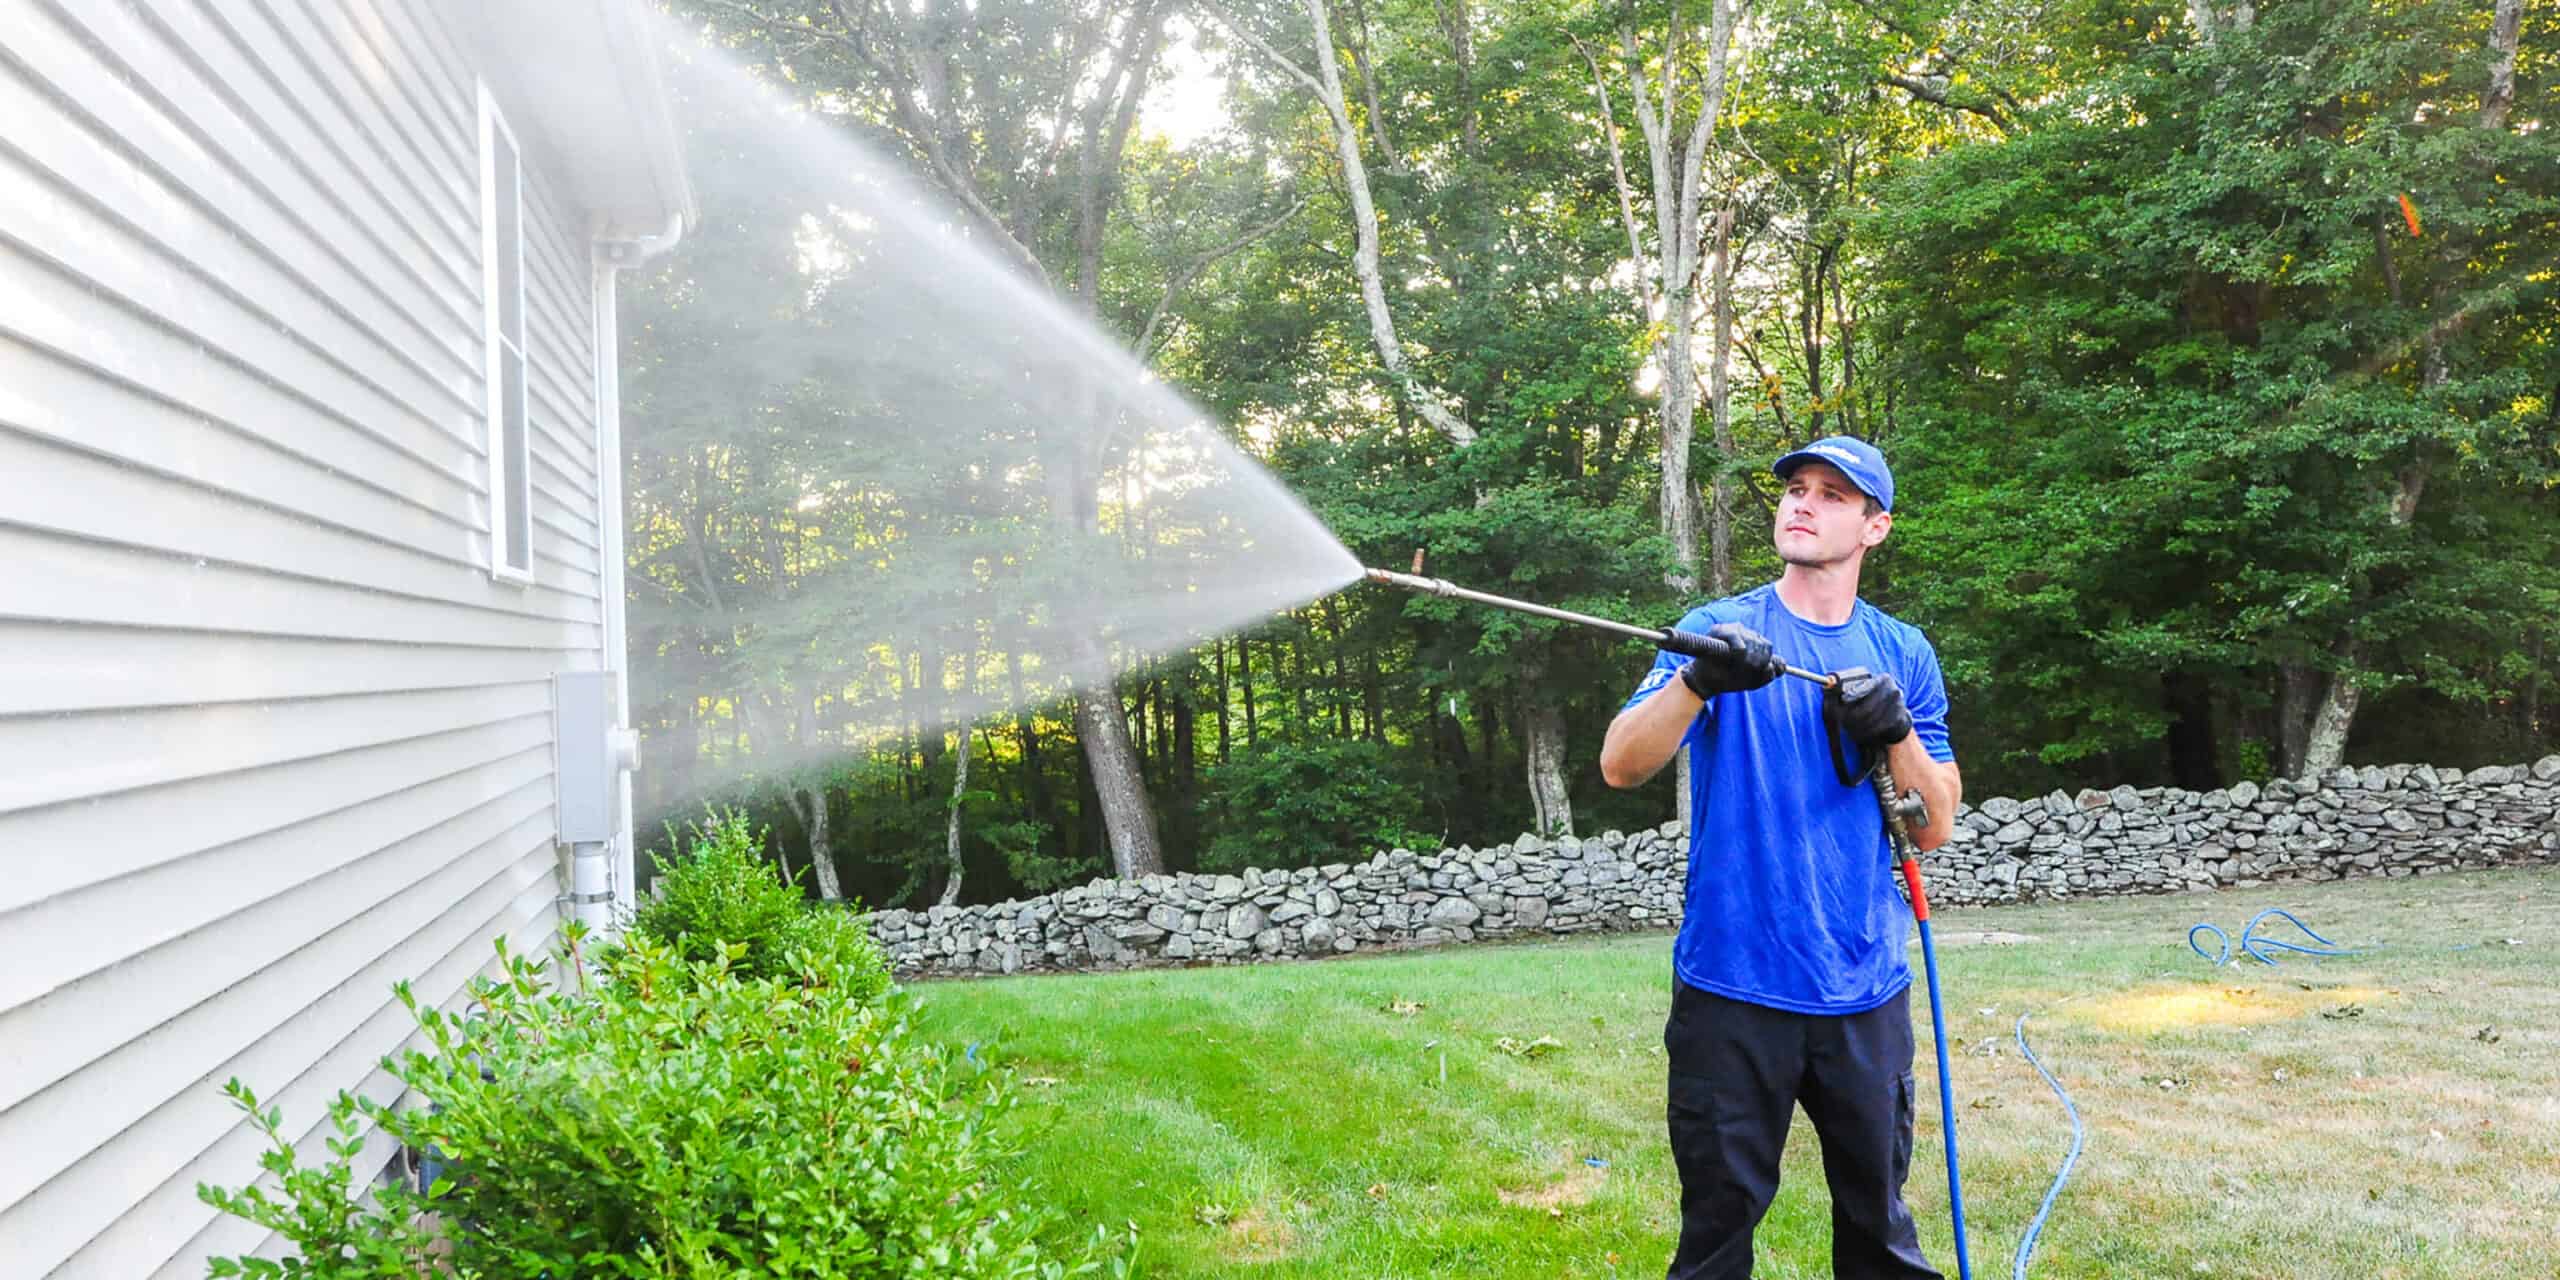 Pressure Washing Services In Pittsburgh Pa